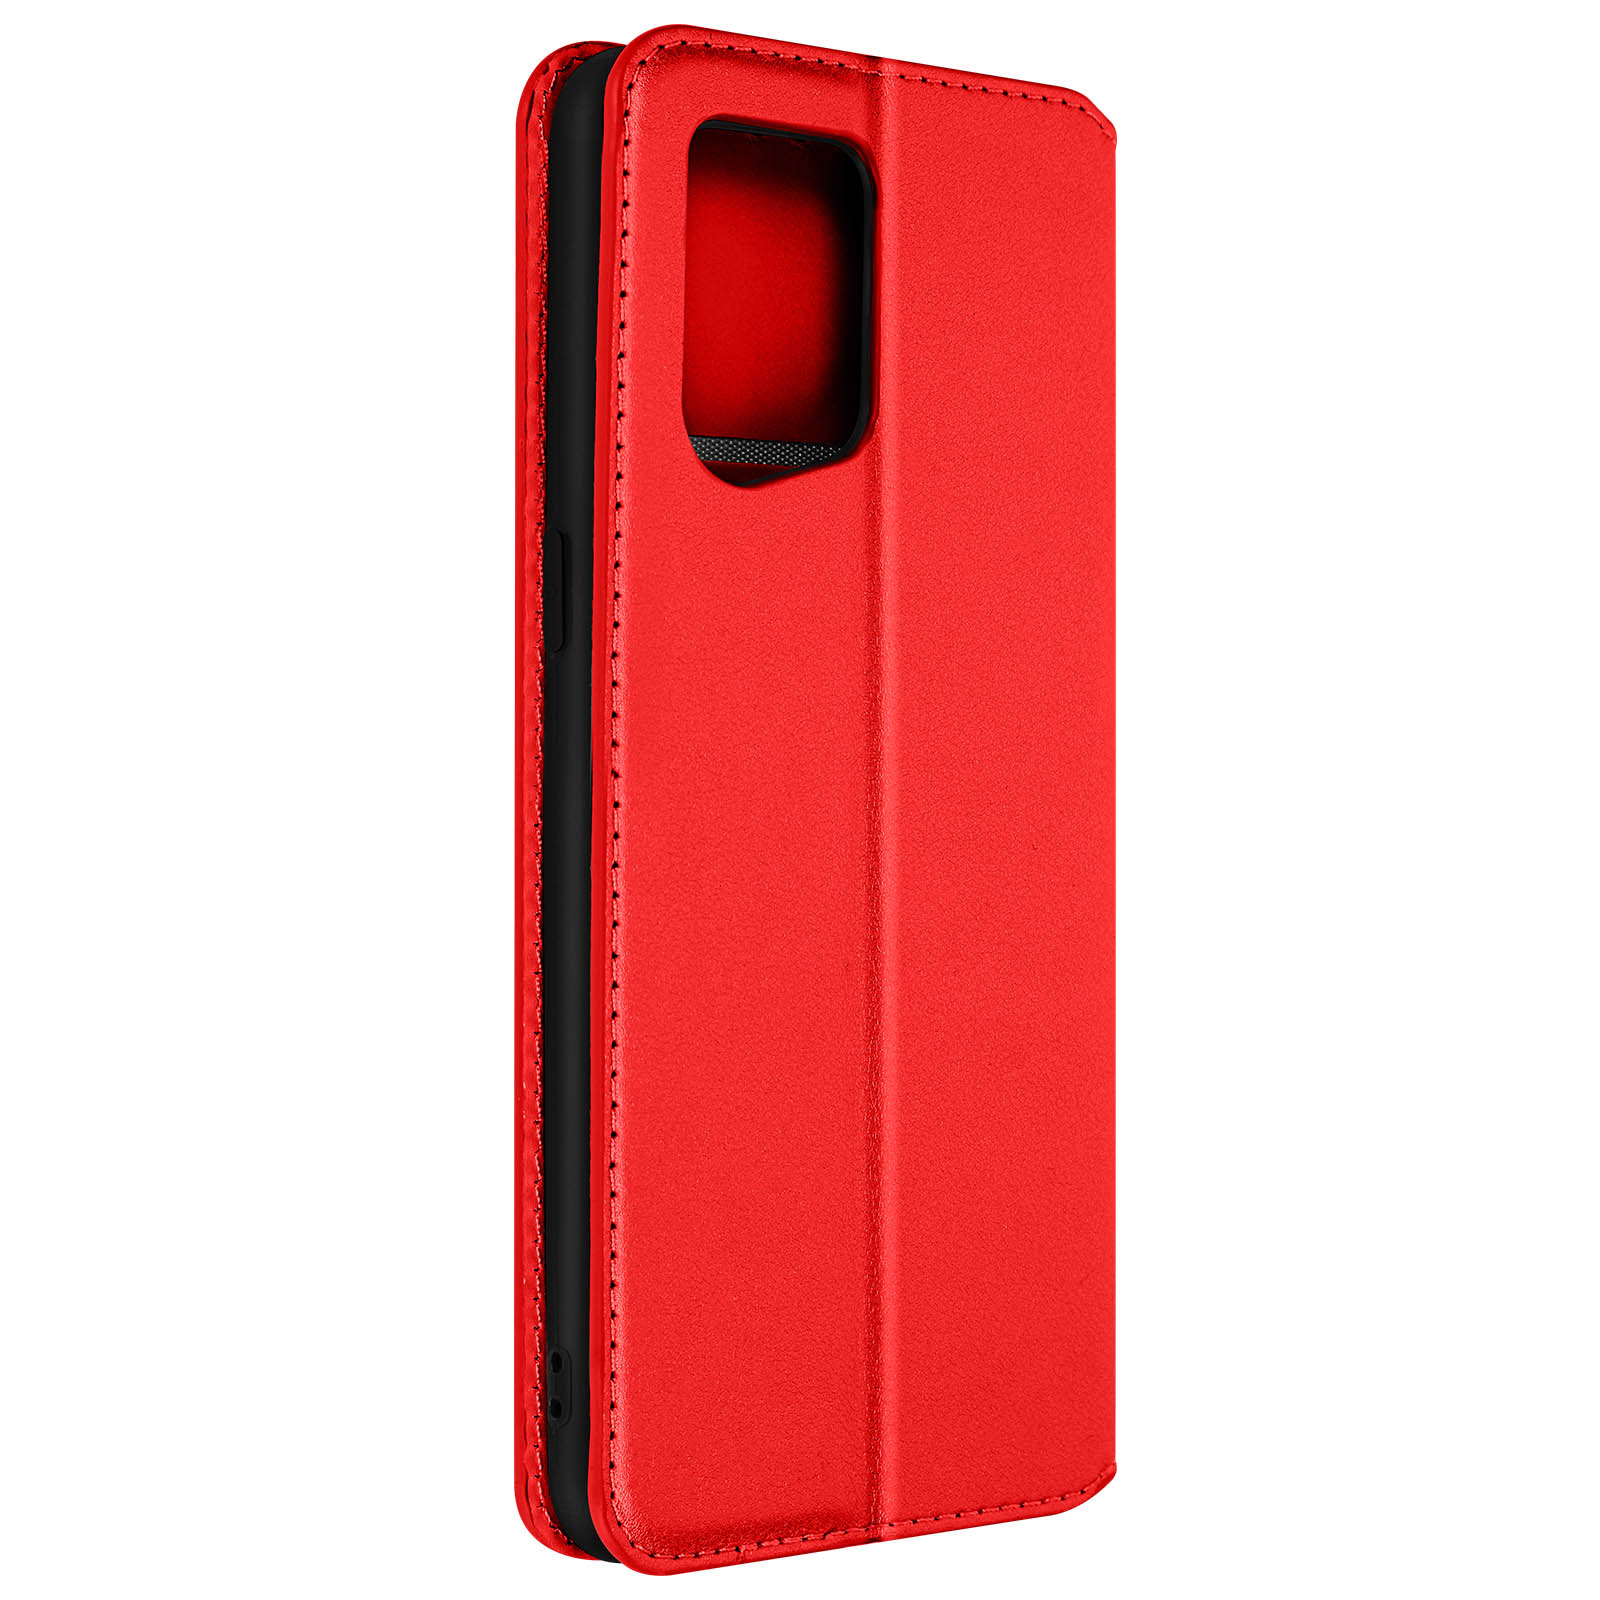 AVIZAR Classic Edition, Backcover mit X5, Oppo, Series, Rot Bookcover, Magnetklappe Oppo Find